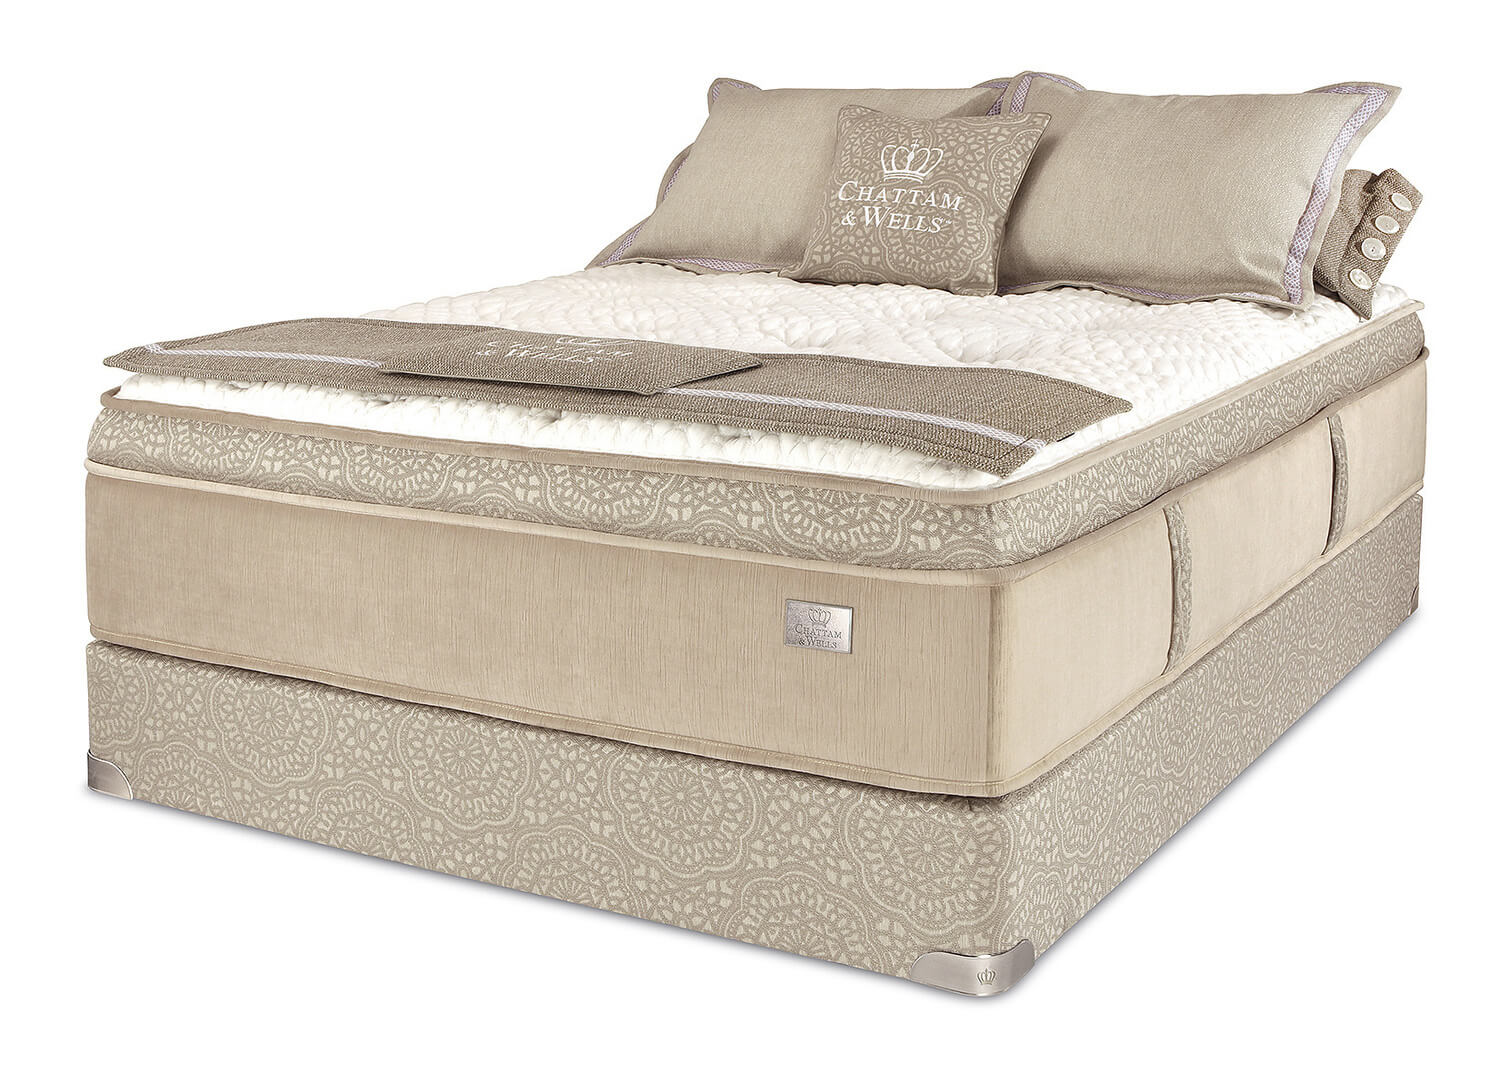 chattam and wells mattress silver lake review